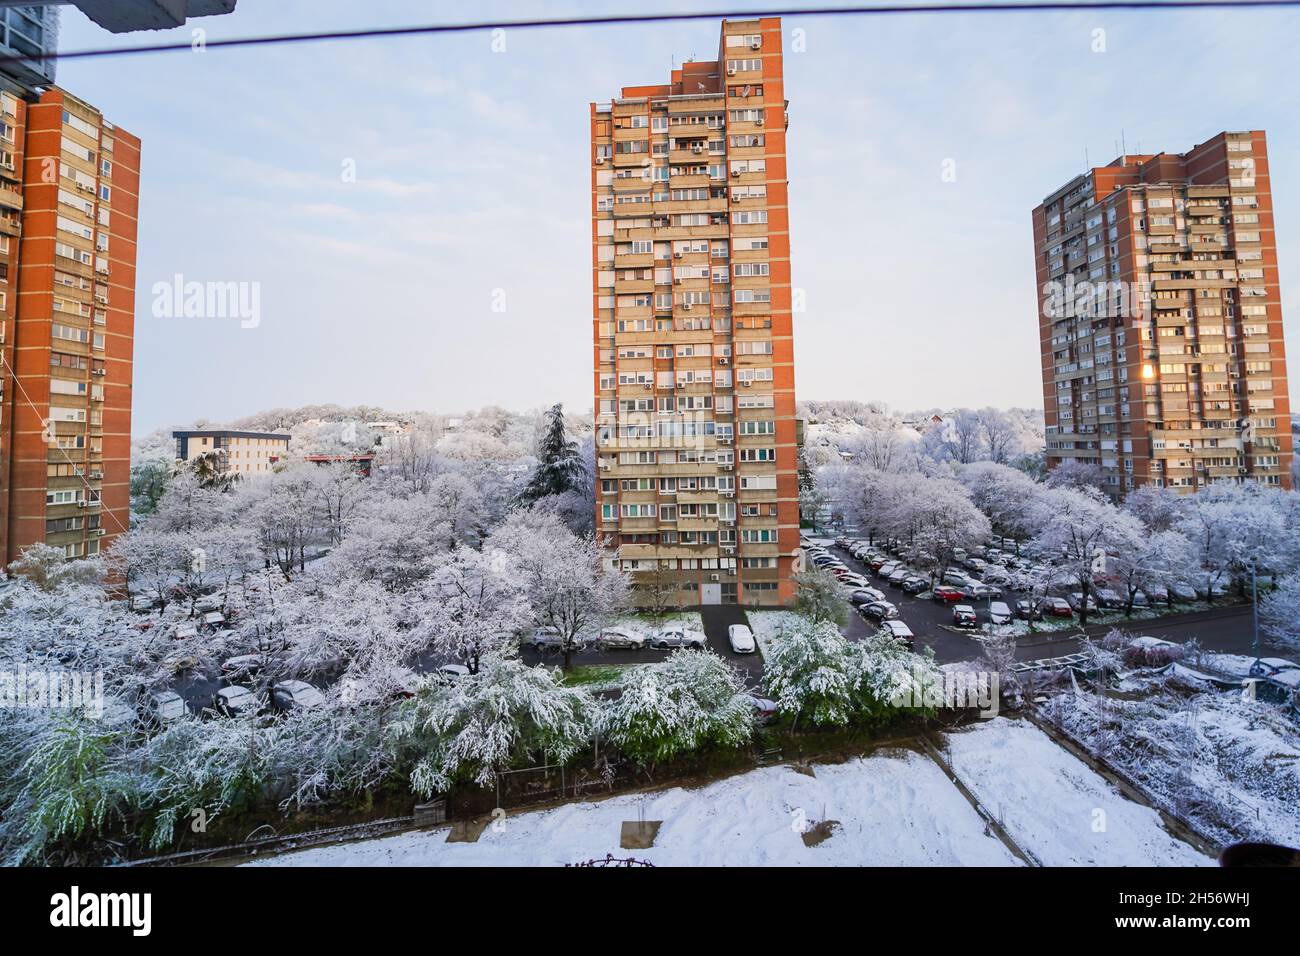 Wide image of the New Belgrade block 4 socialist era buildings during the Winter with a lot of snow covering the trees and cars on the street Stock Photo